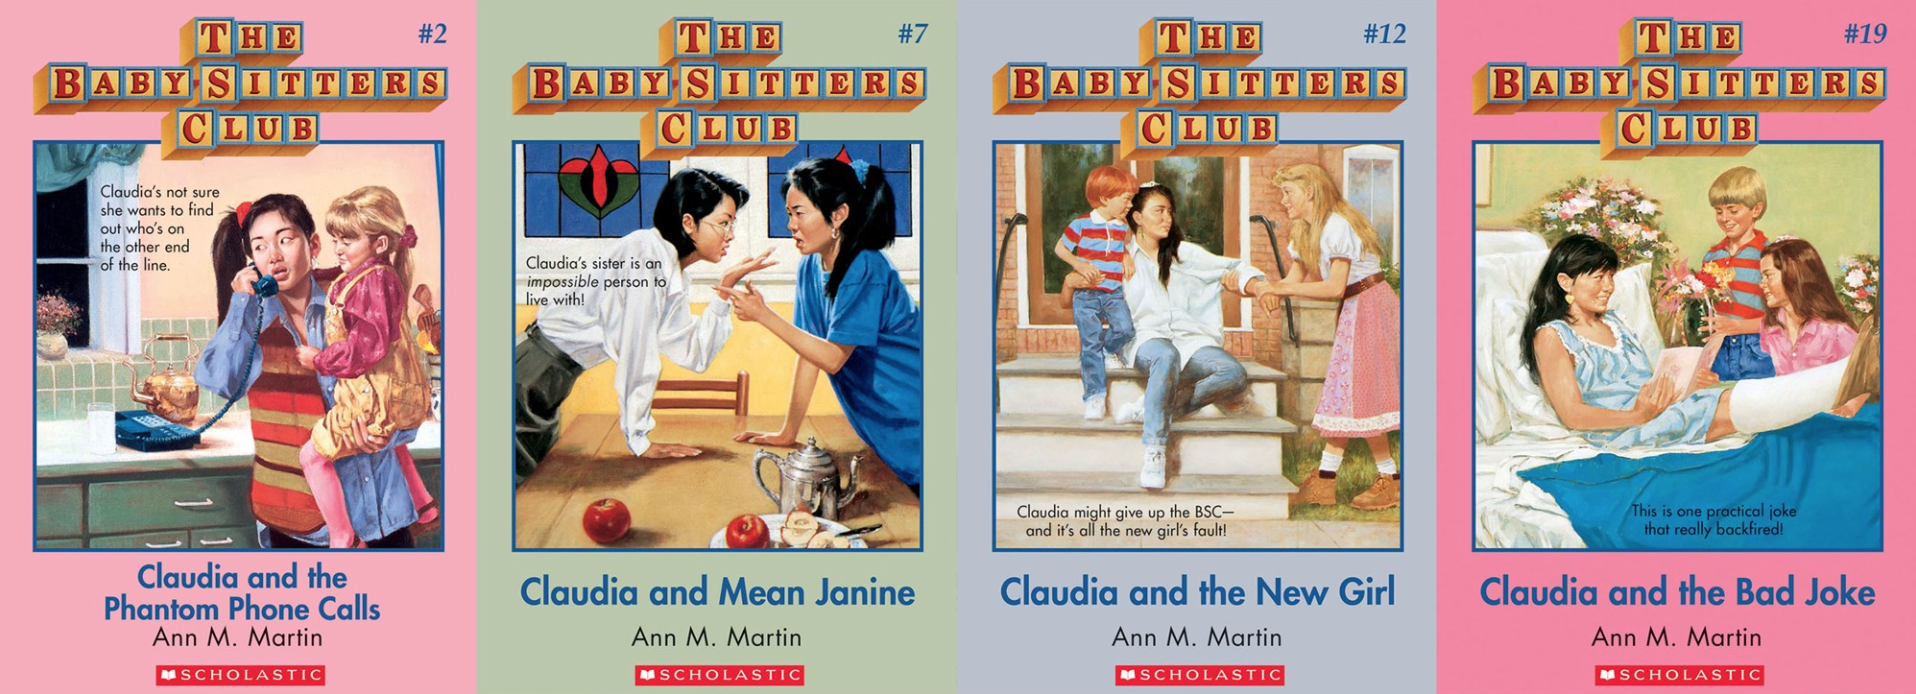 Four covers of the The Babysitters Club books